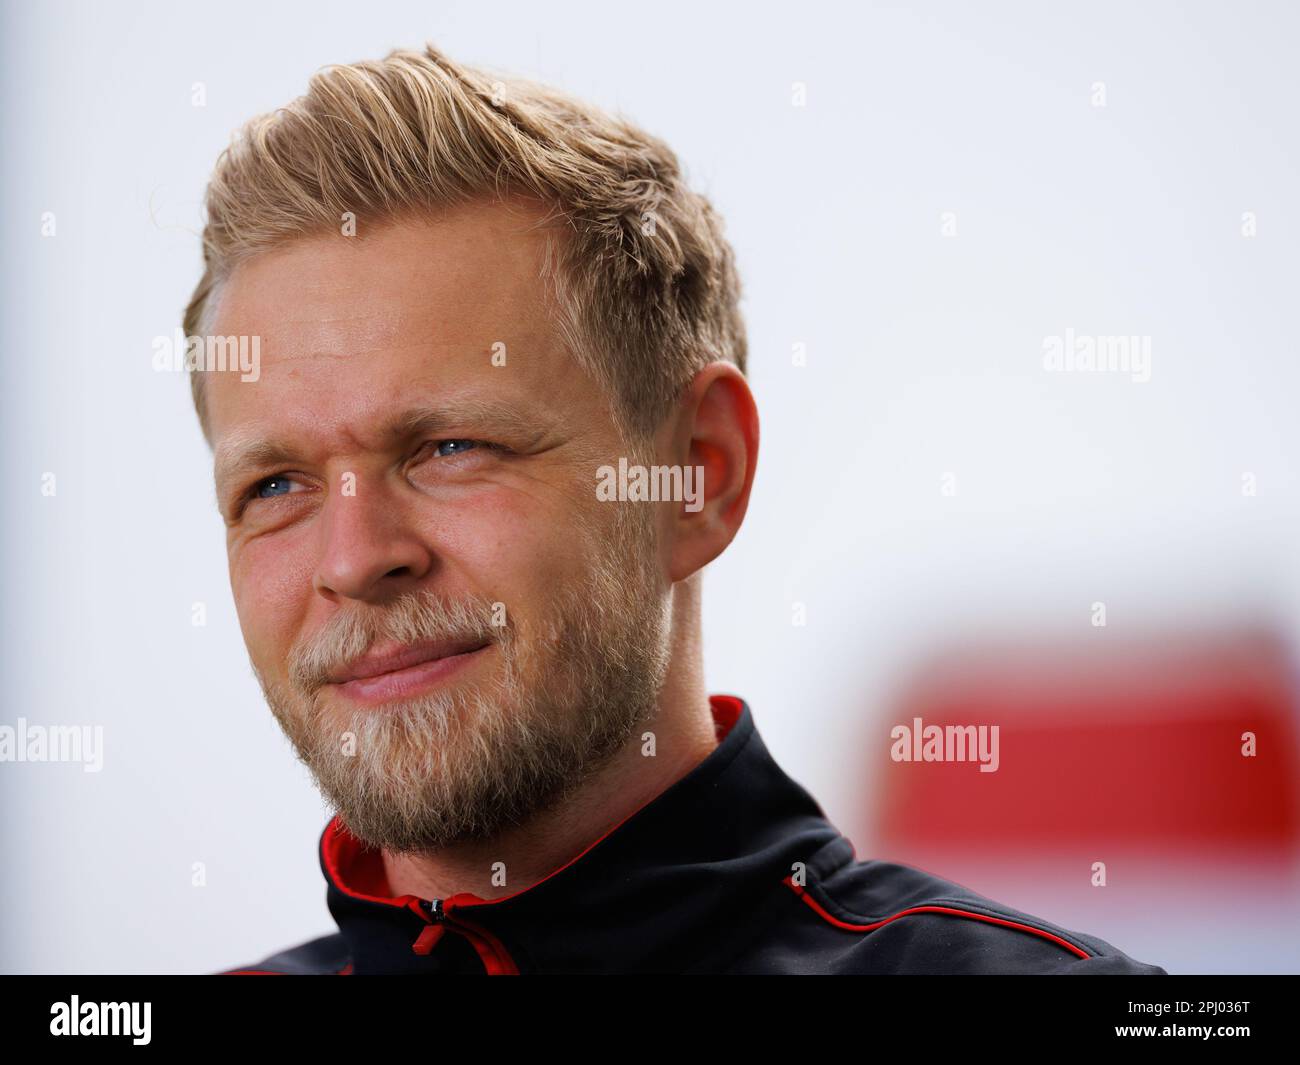 Albert Park, 30th March 2023 Kevin Magnussen (DEN) of the Haas F1 team in the paddock at the 2023 Australian Formula 1 Grand Prix. corleve/Alamy Live News Stock Photo